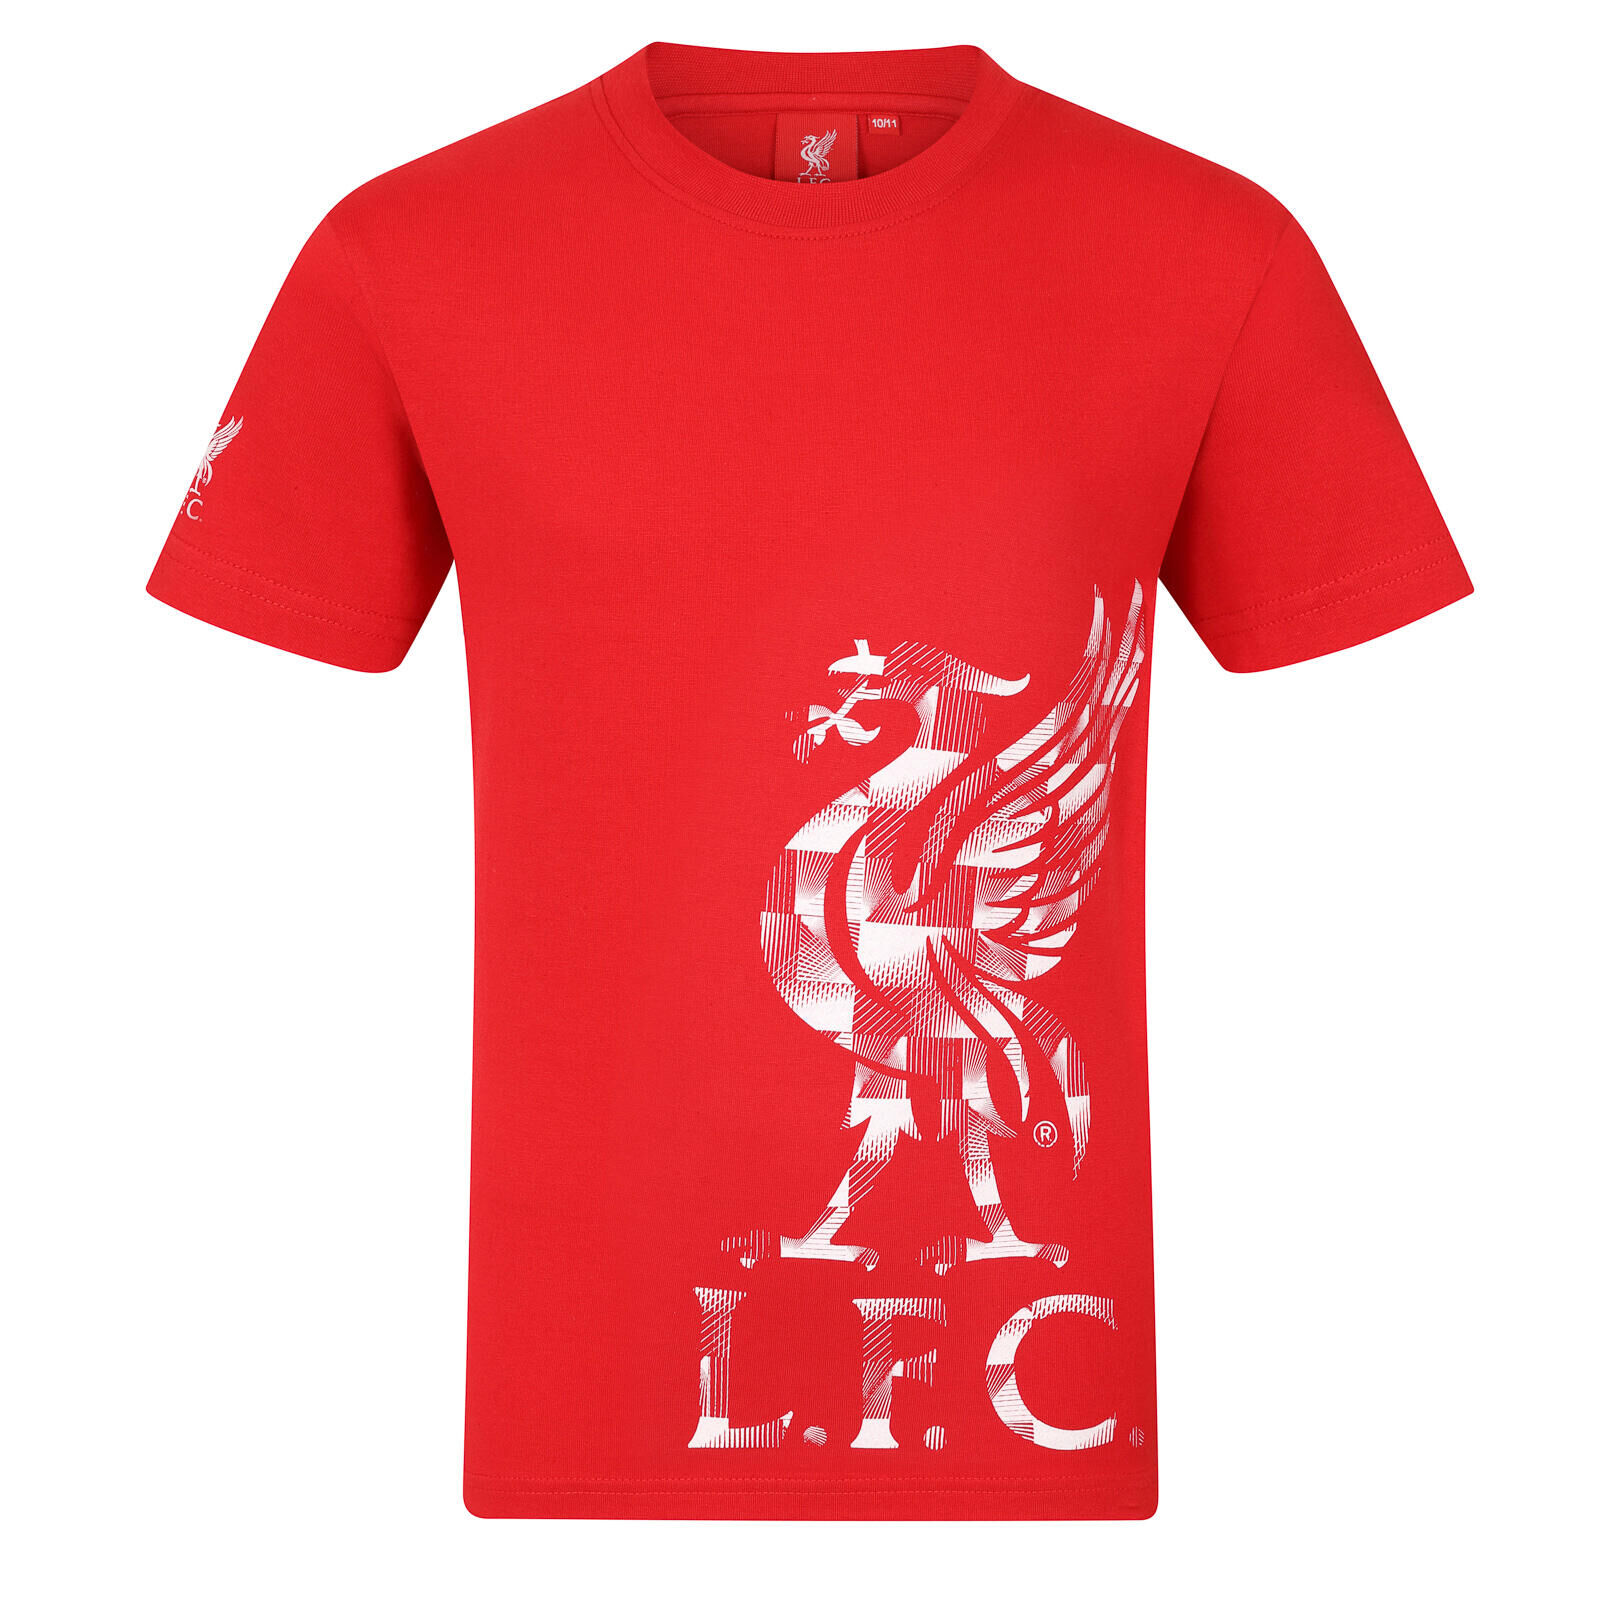 LIVERPOOL FC Liverpool FC Boys T-Shirt Graphic Kids OFFICIAL Football Gift